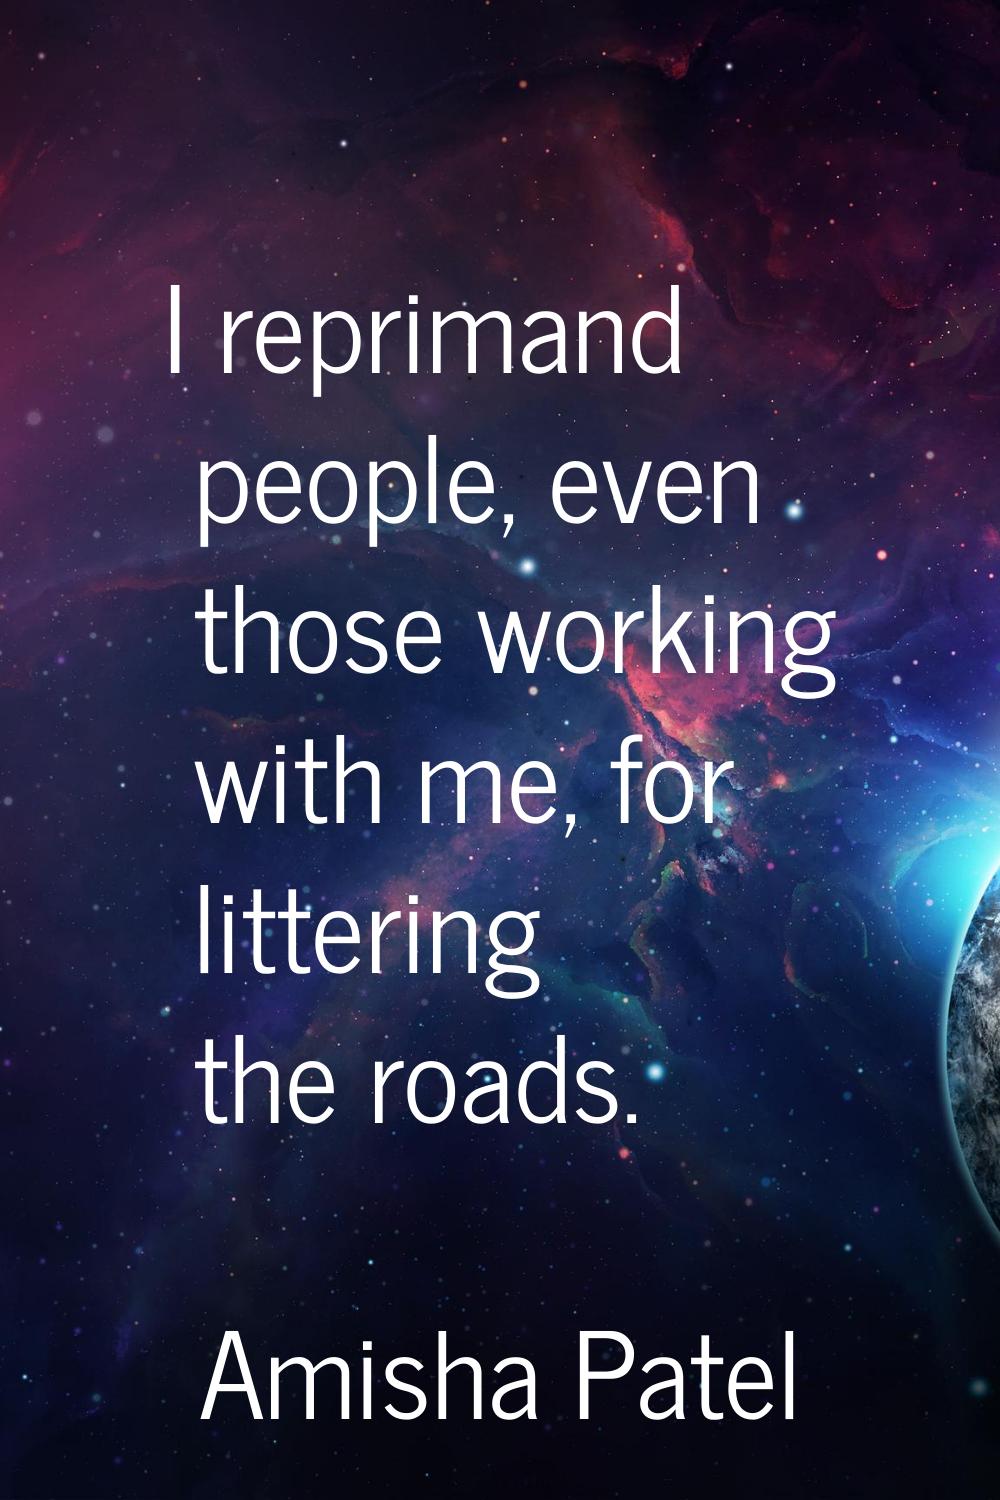 I reprimand people, even those working with me, for littering the roads.